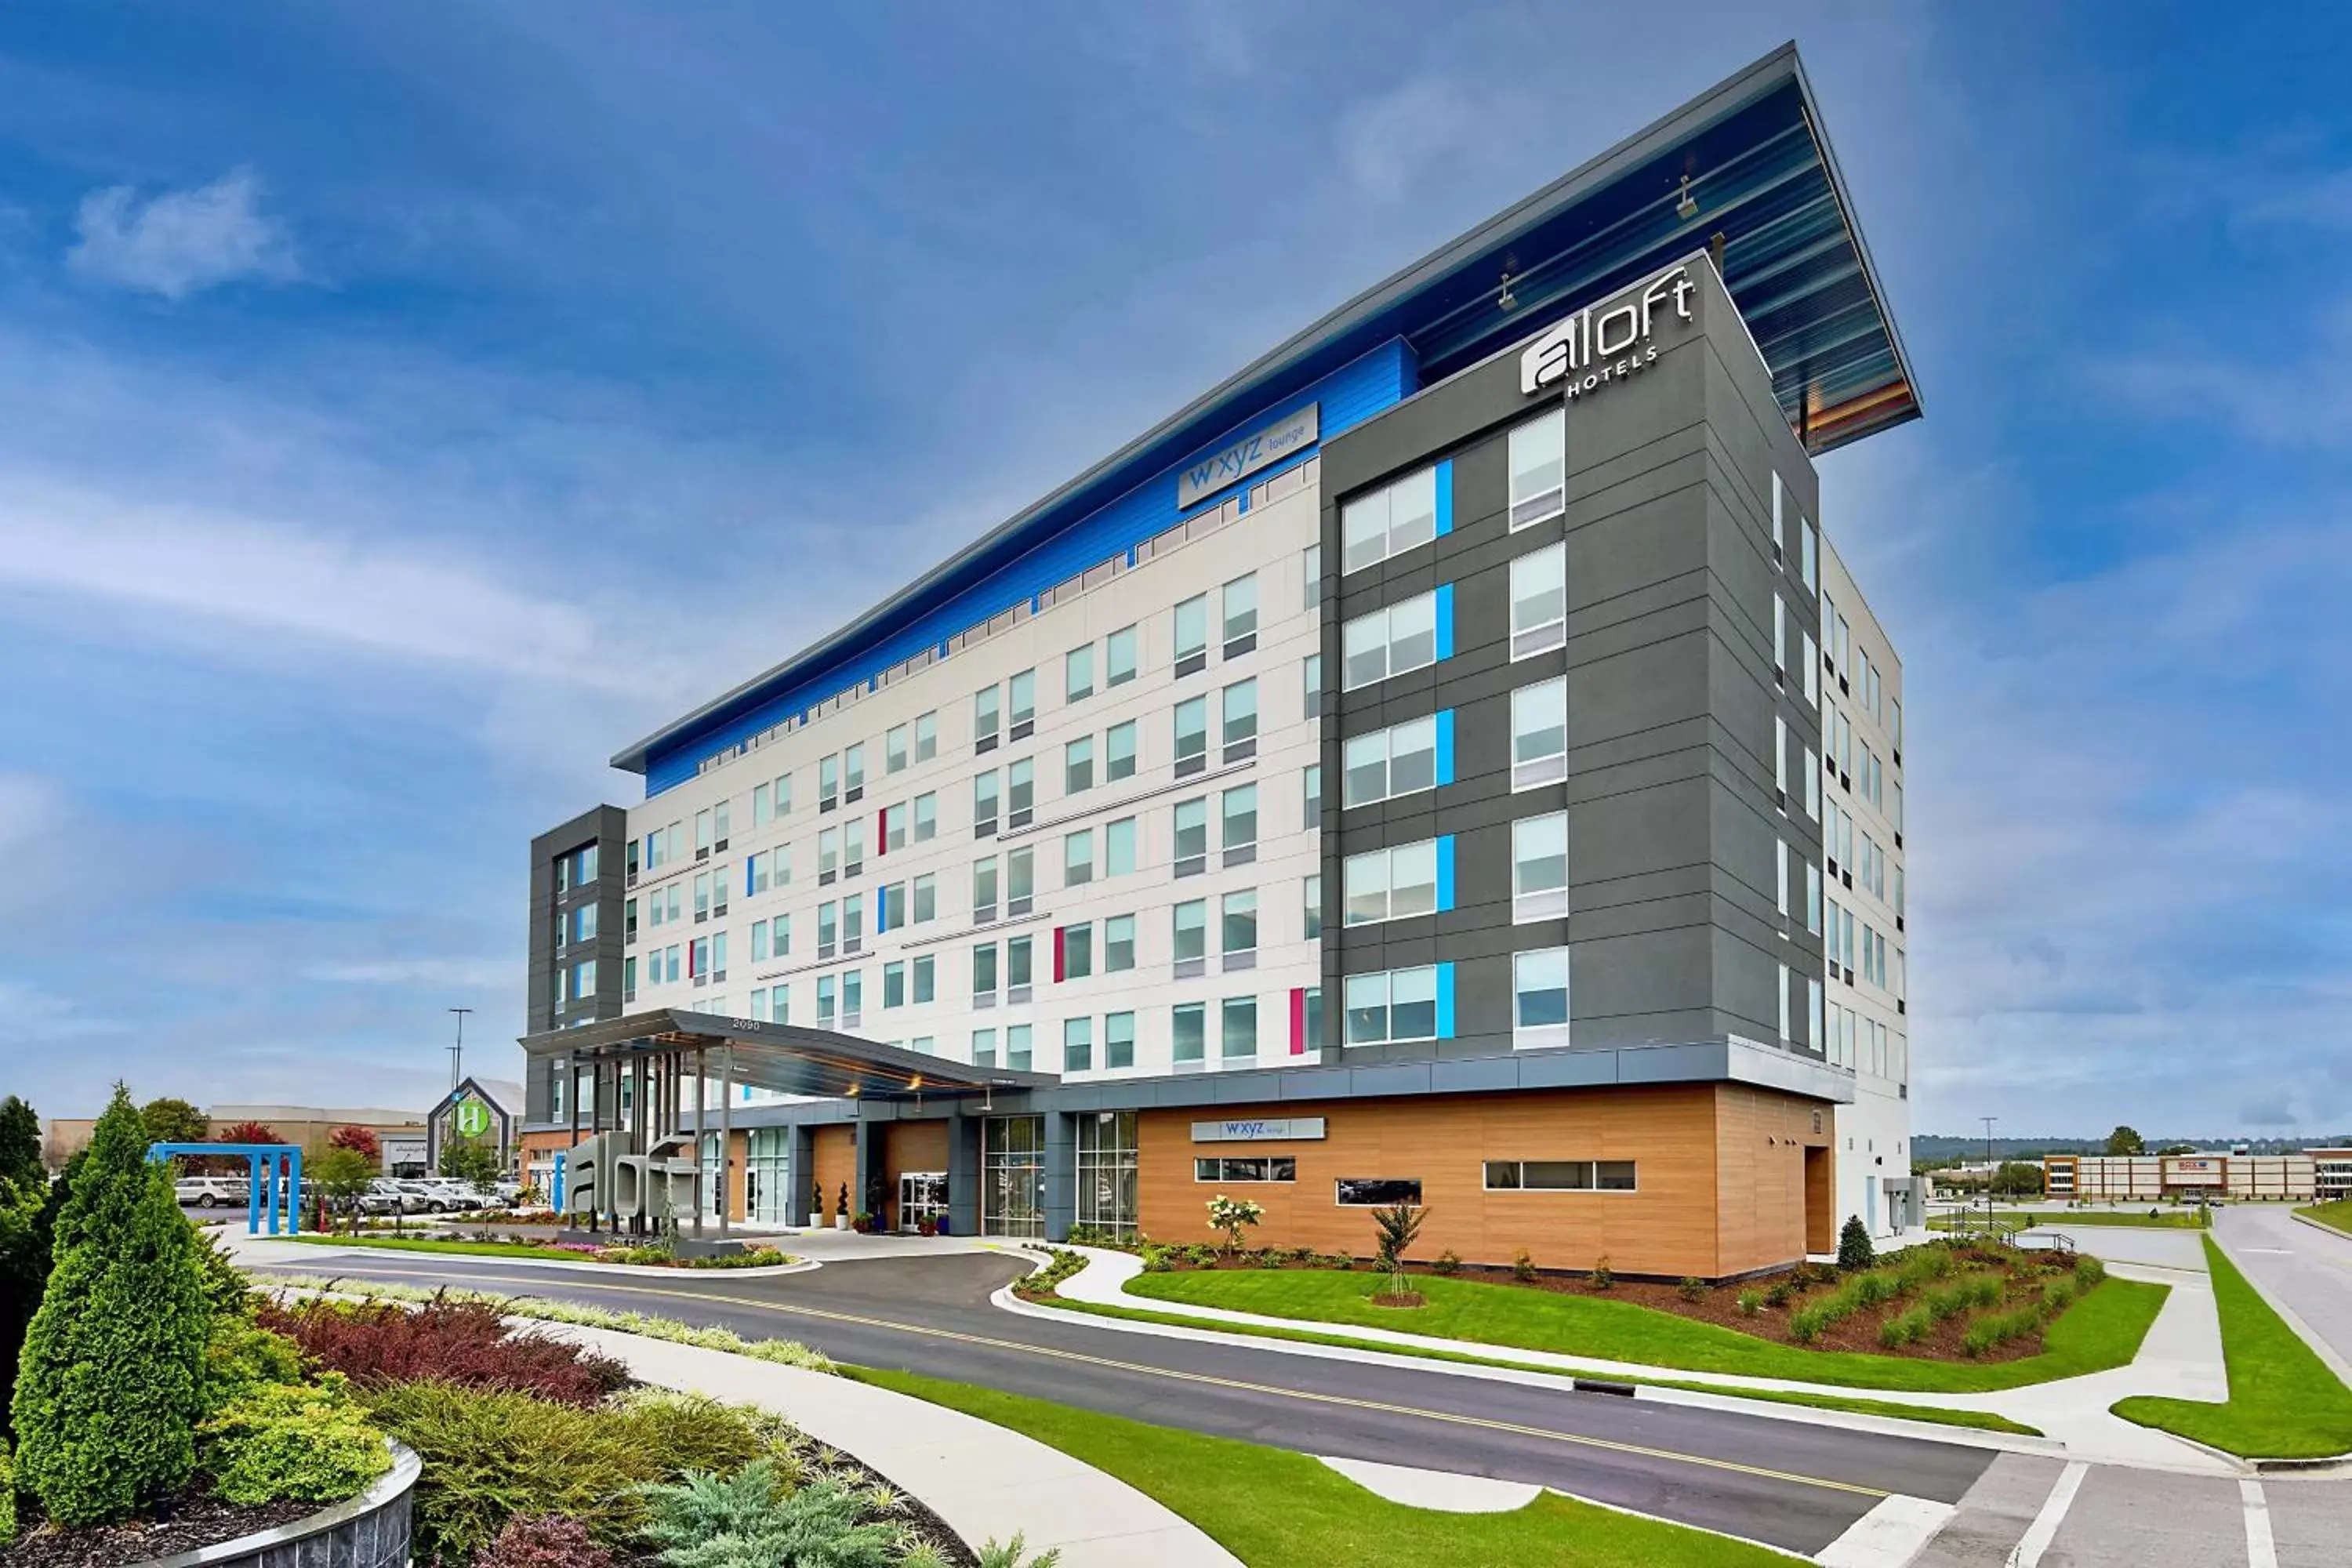 Property Building in Aloft Chattanooga Hamilton Place